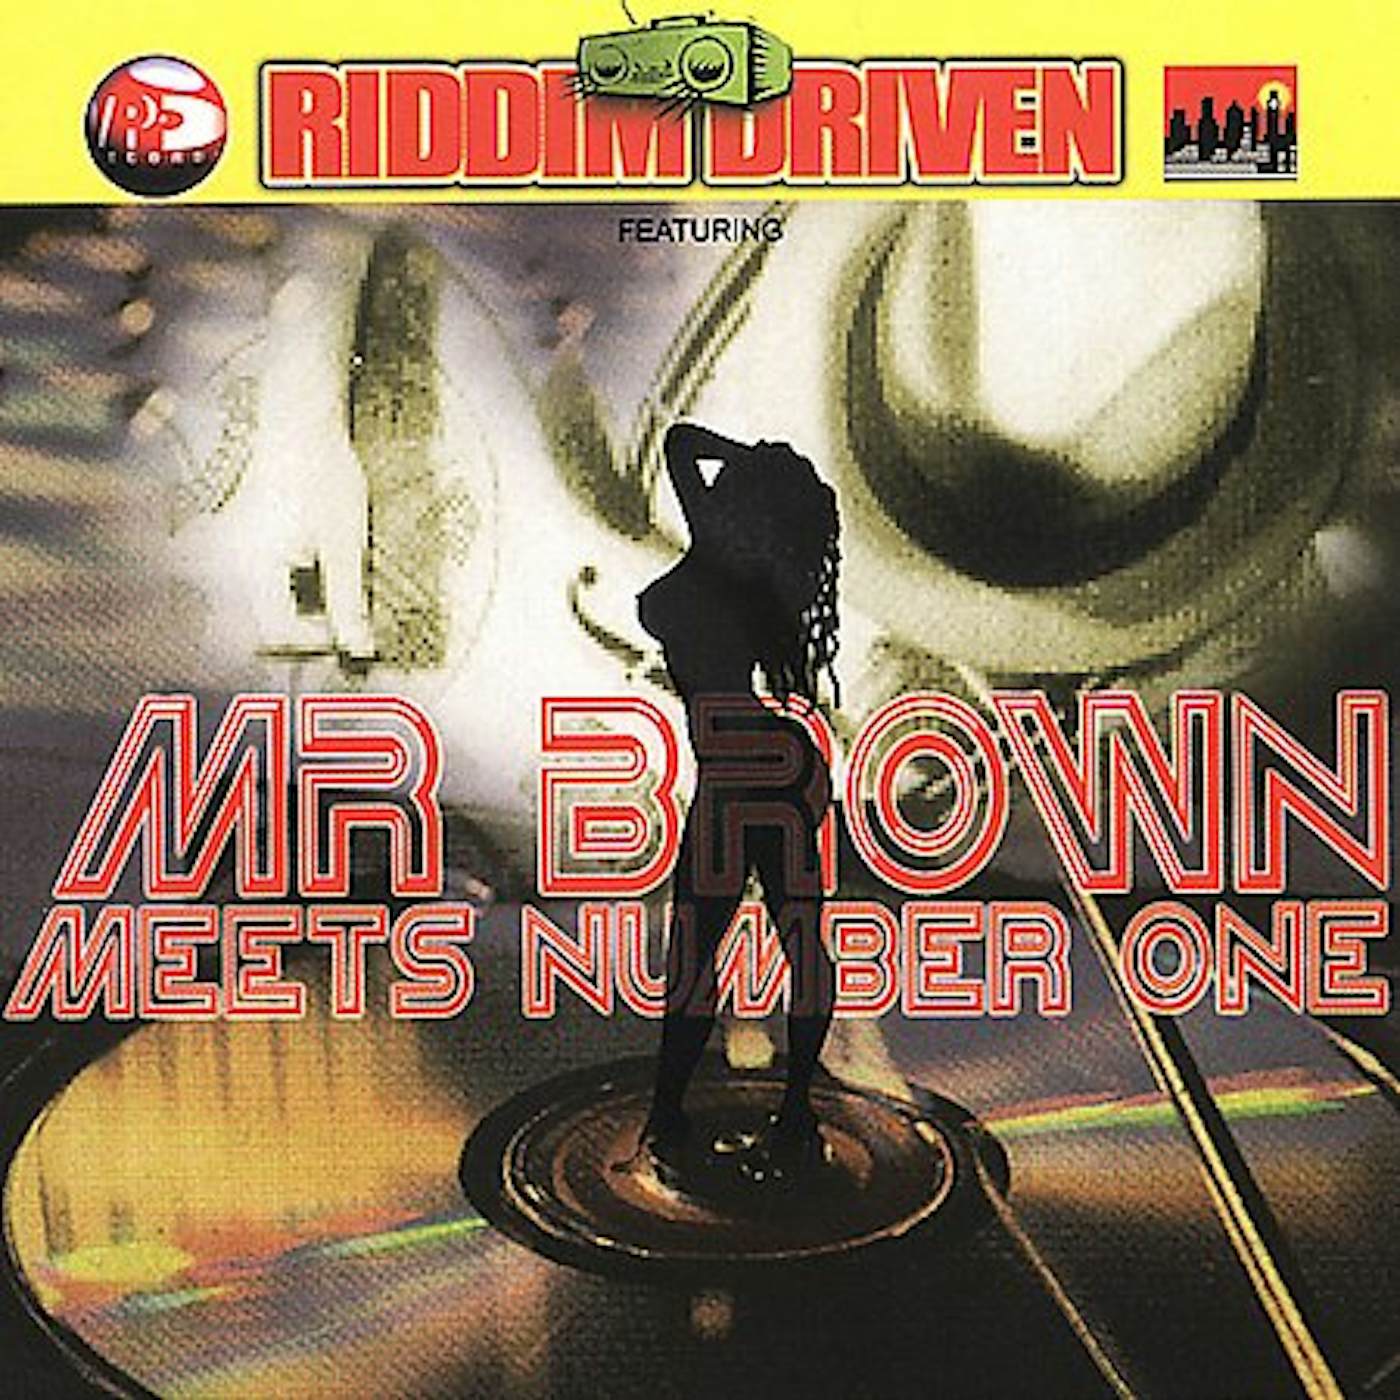 RIDDIM DRIVEN: MR BROWN MEETS NUMBER ONE / VARIOUS Vinyl Record